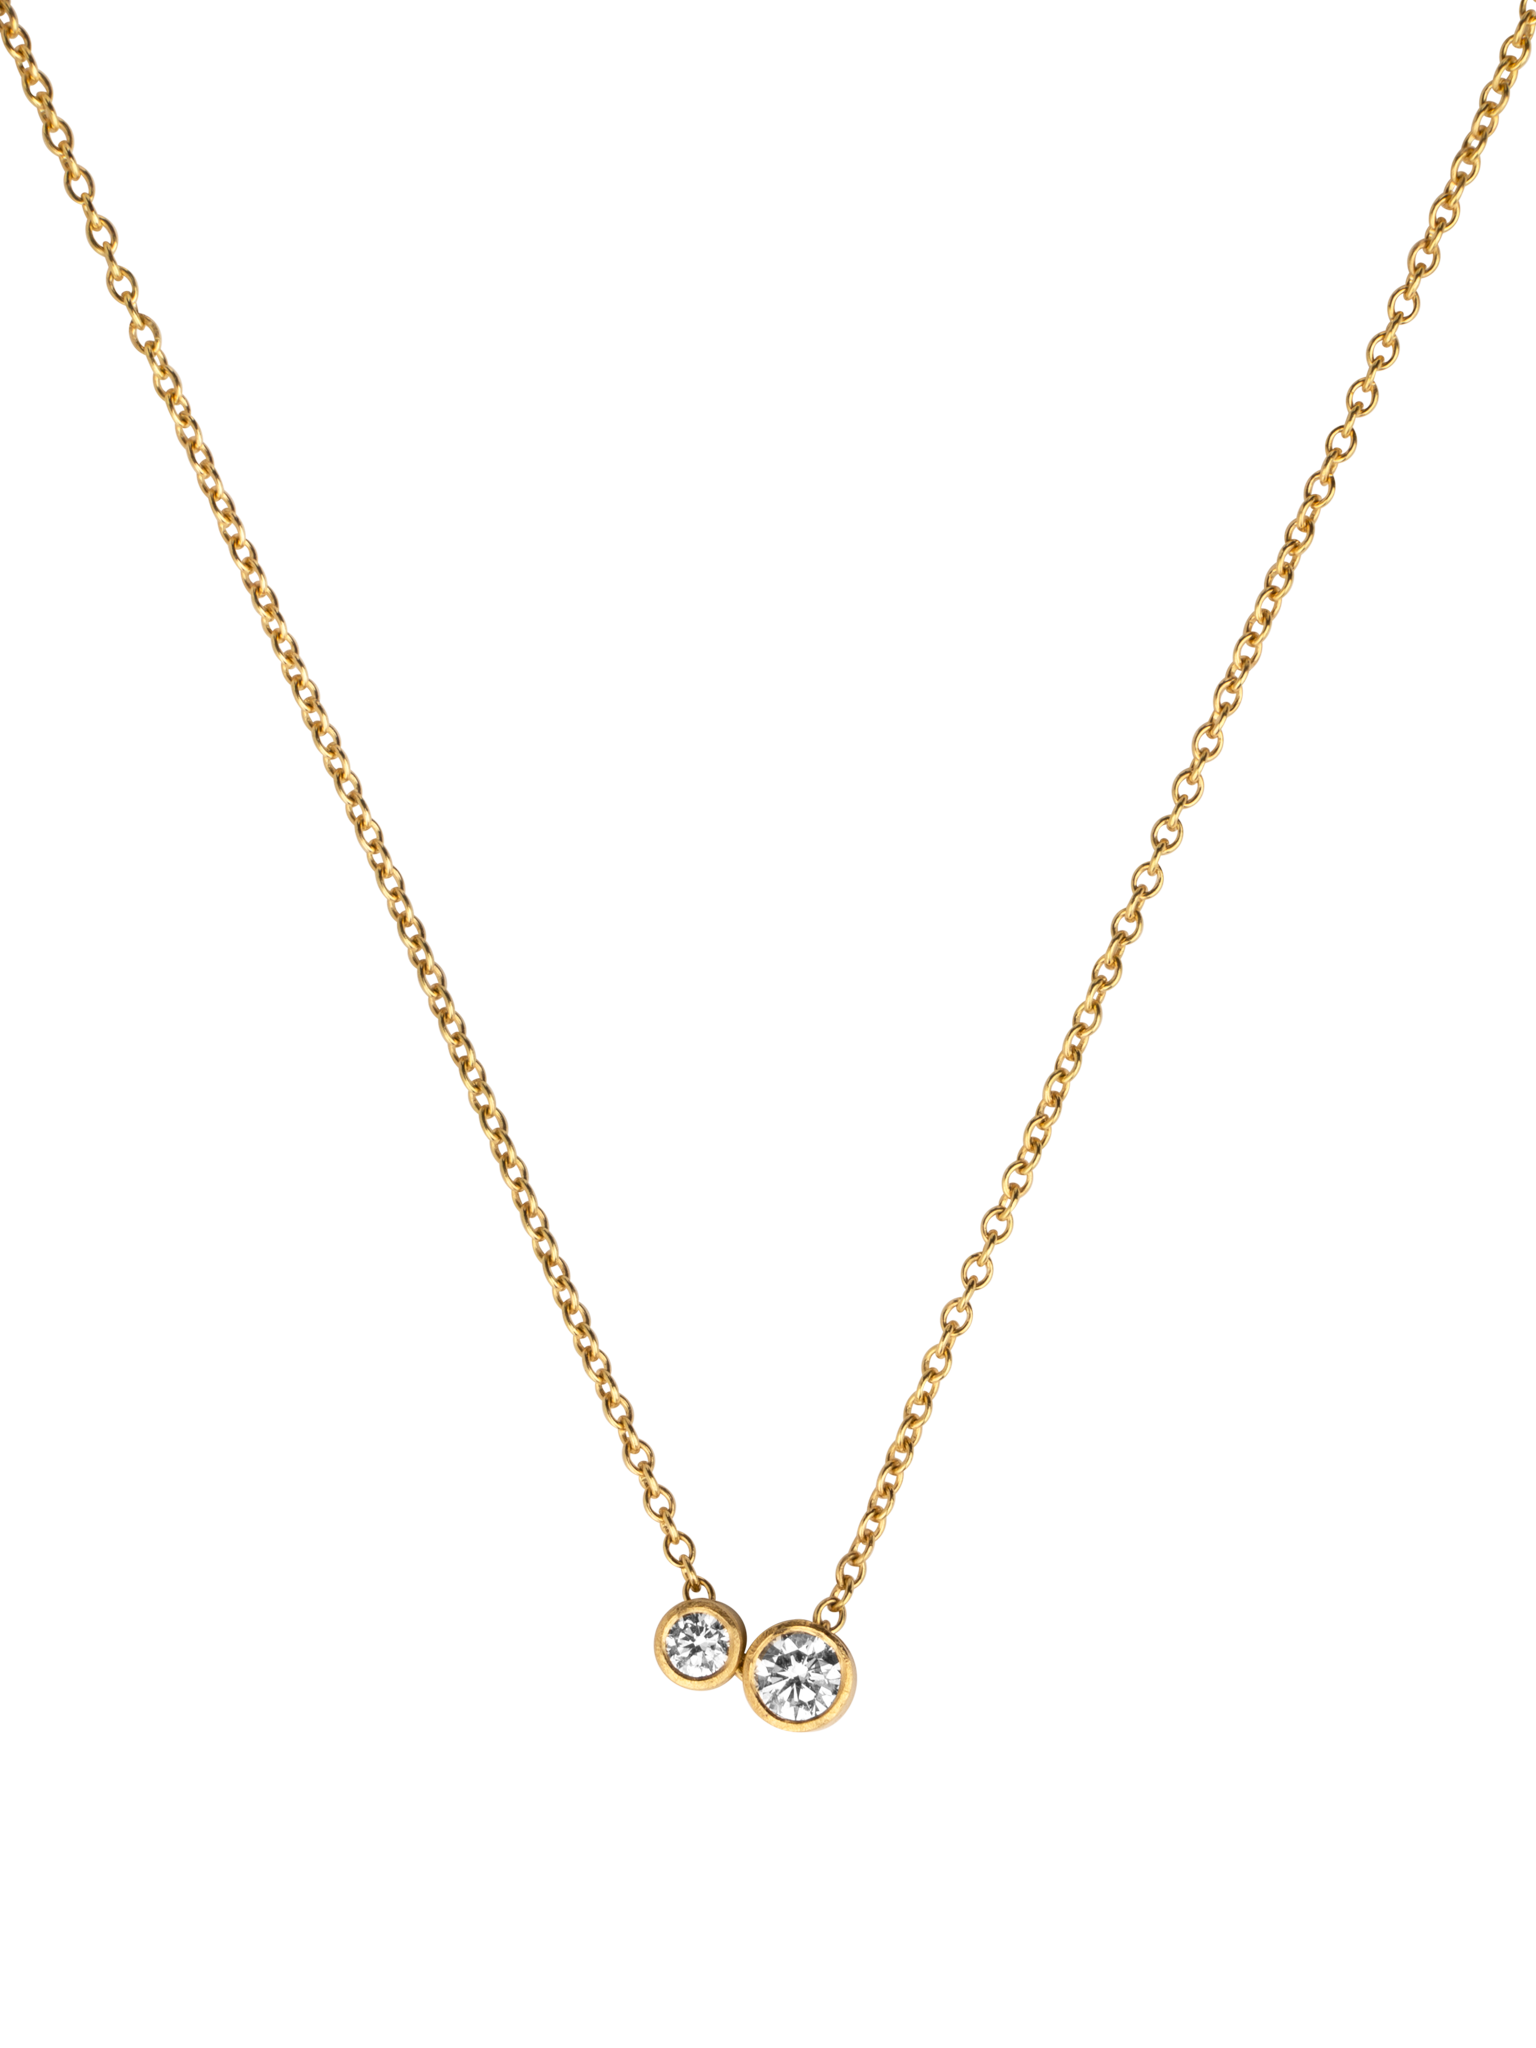 Two diamonds on a chain necklace